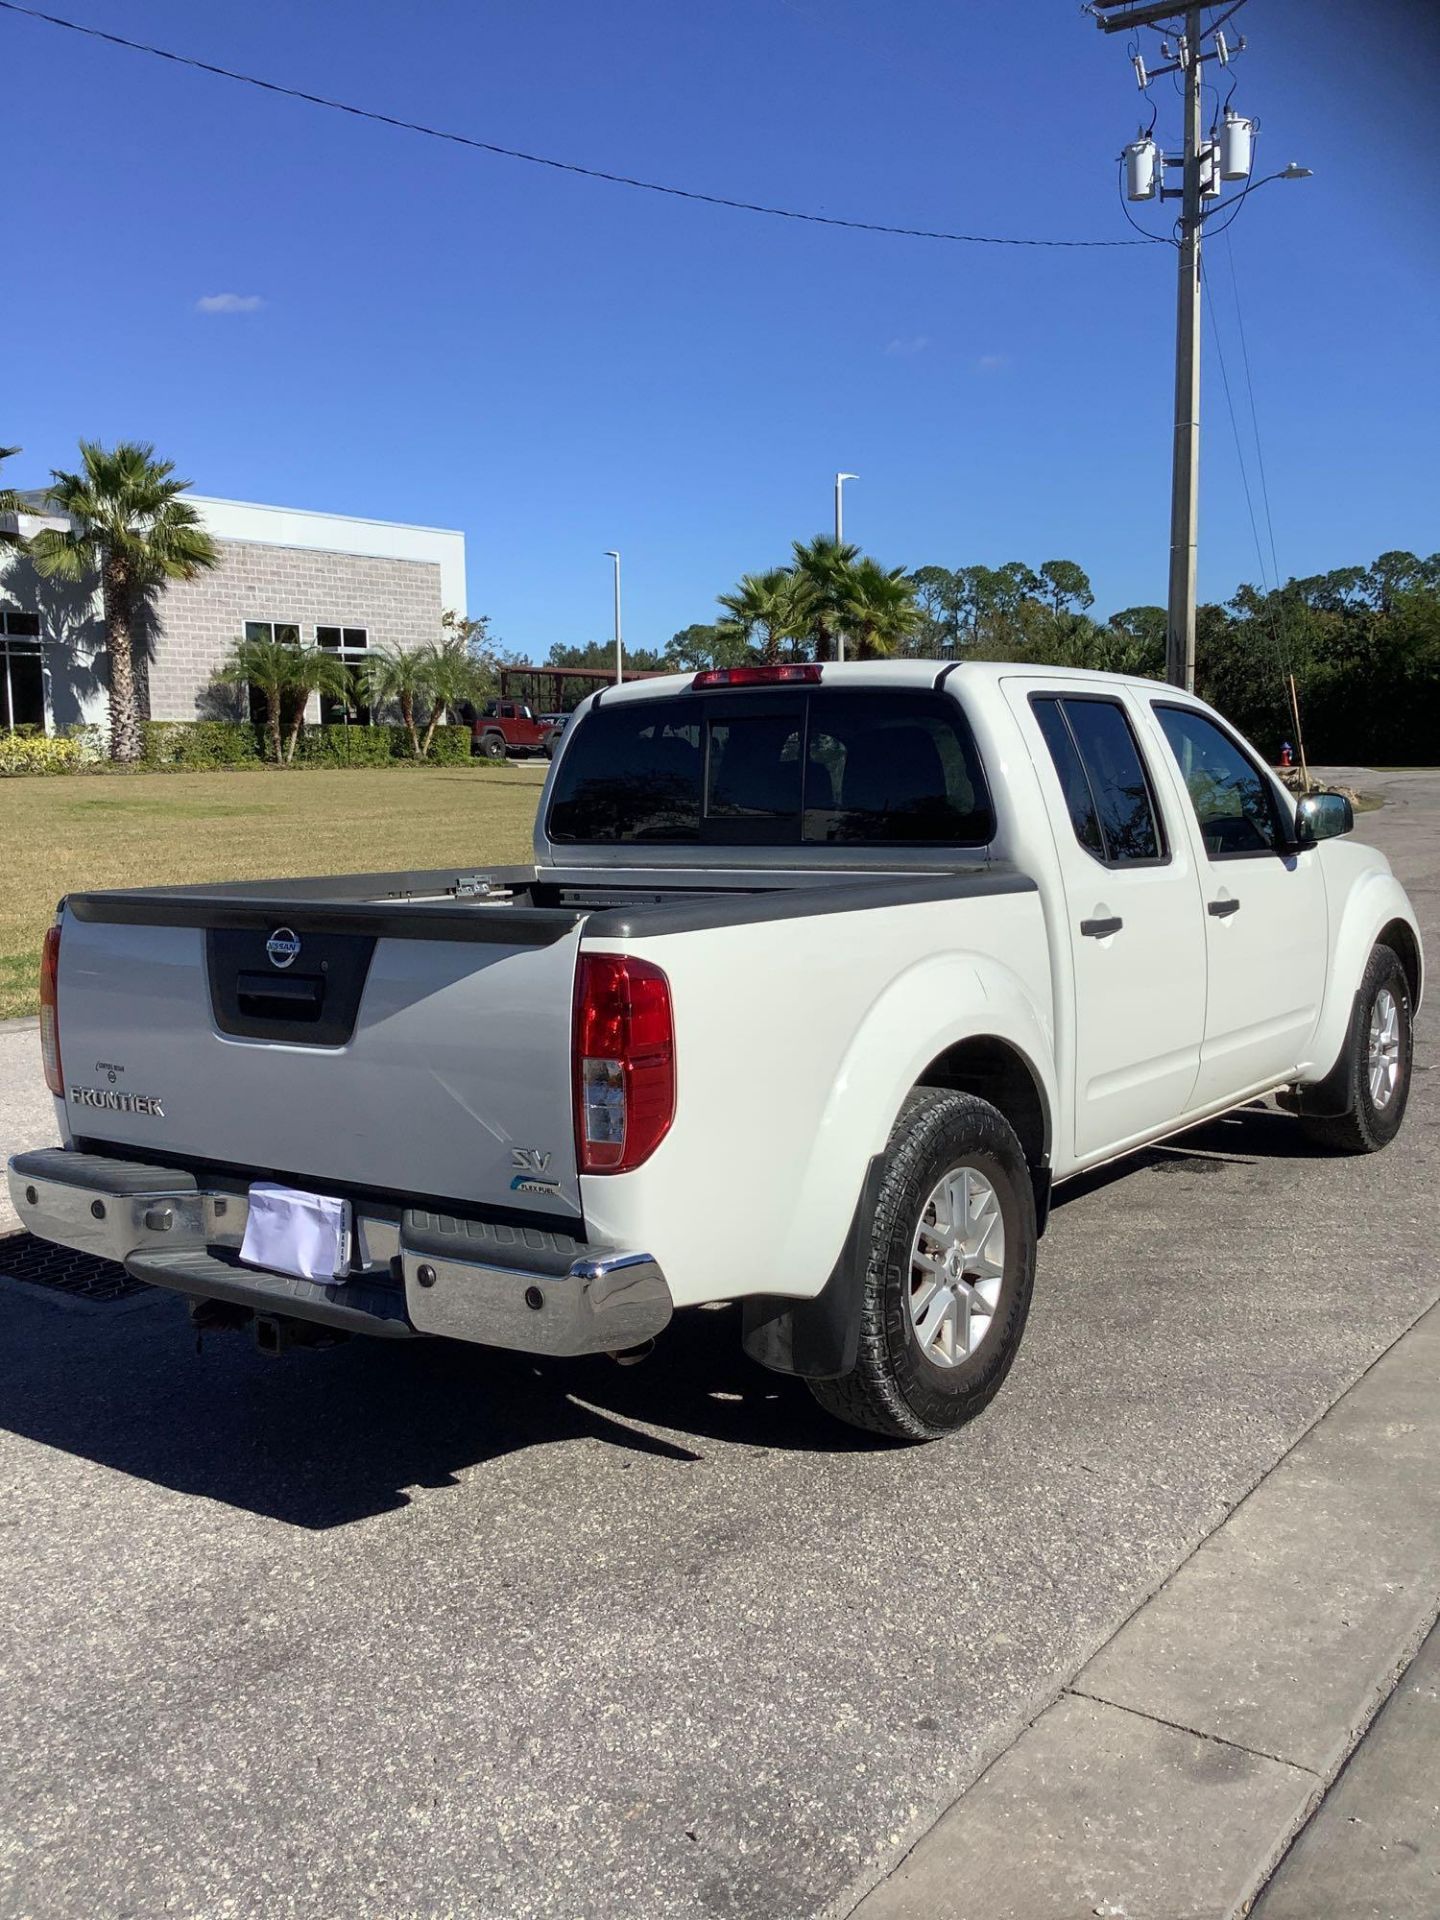 2017 NISSAN FRONTIER PICKUP TRUCK, GAS ENGINE, AUTOMATIC TRANSMISSION, CREW CAB, 4 DOOR, A/C , POWER - Image 5 of 24